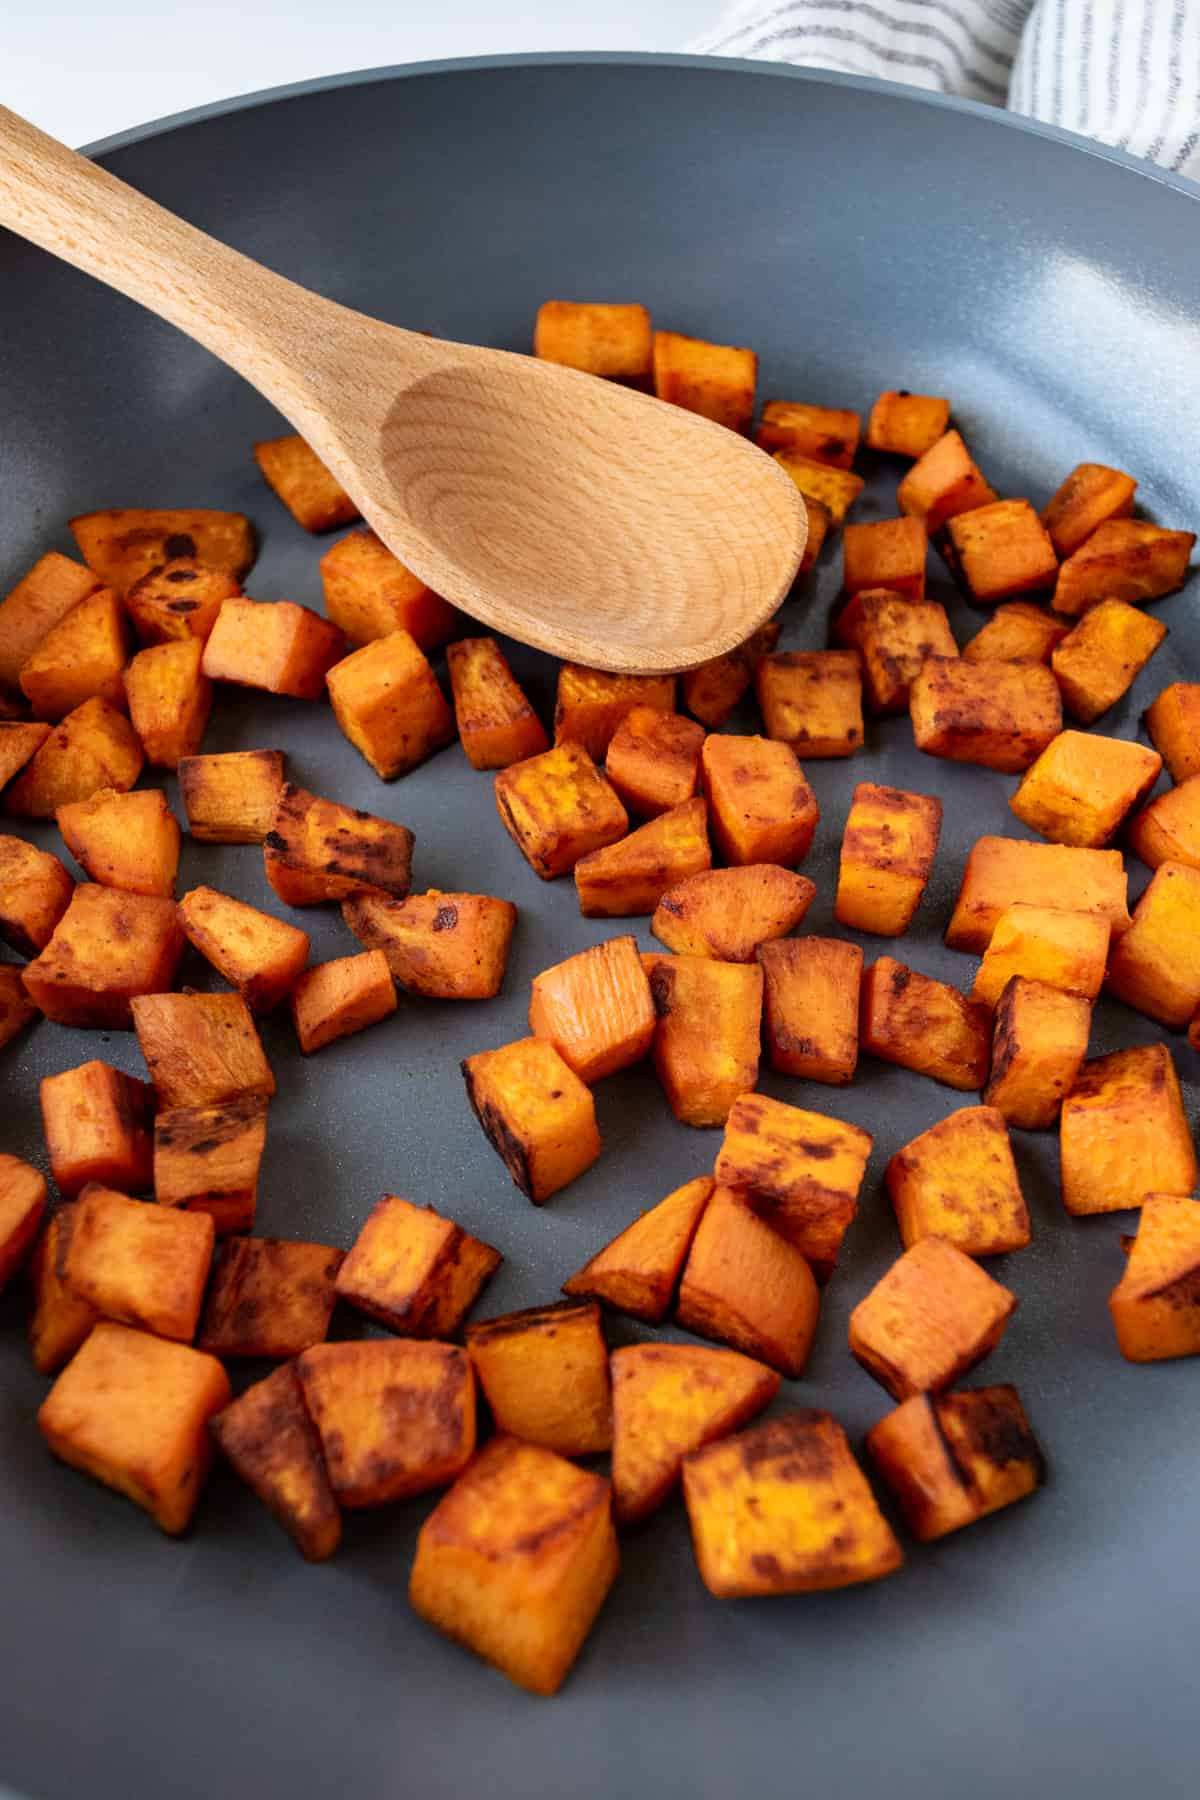 Sautéed Sweet Potatoes in a skillet with a wooden spoon.